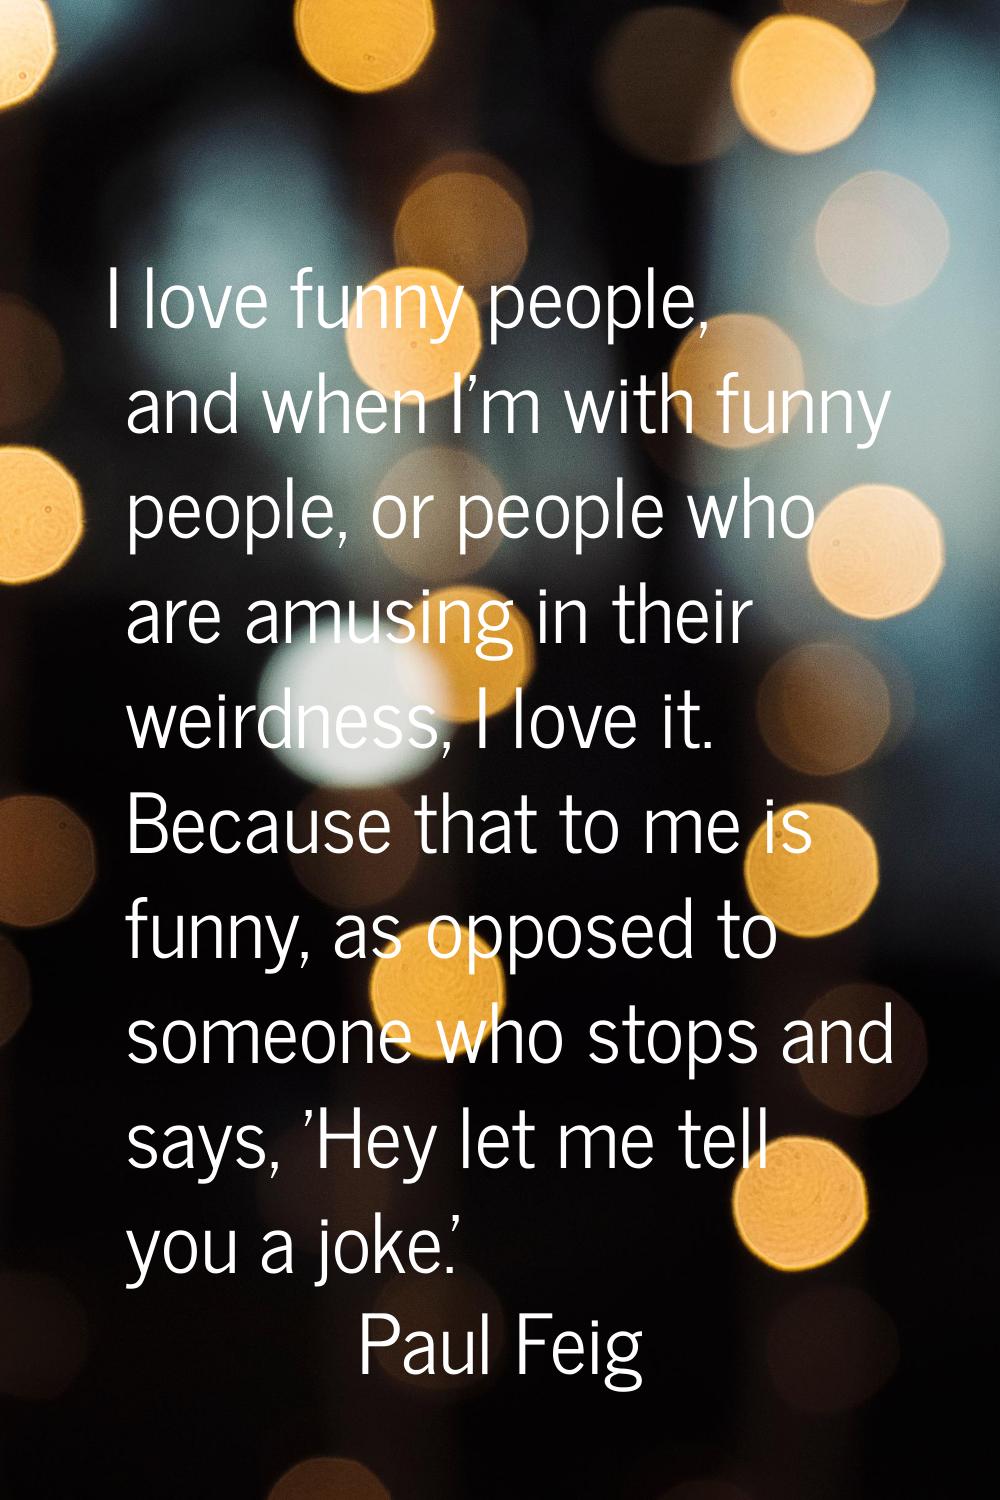 I love funny people, and when I'm with funny people, or people who are amusing in their weirdness, 